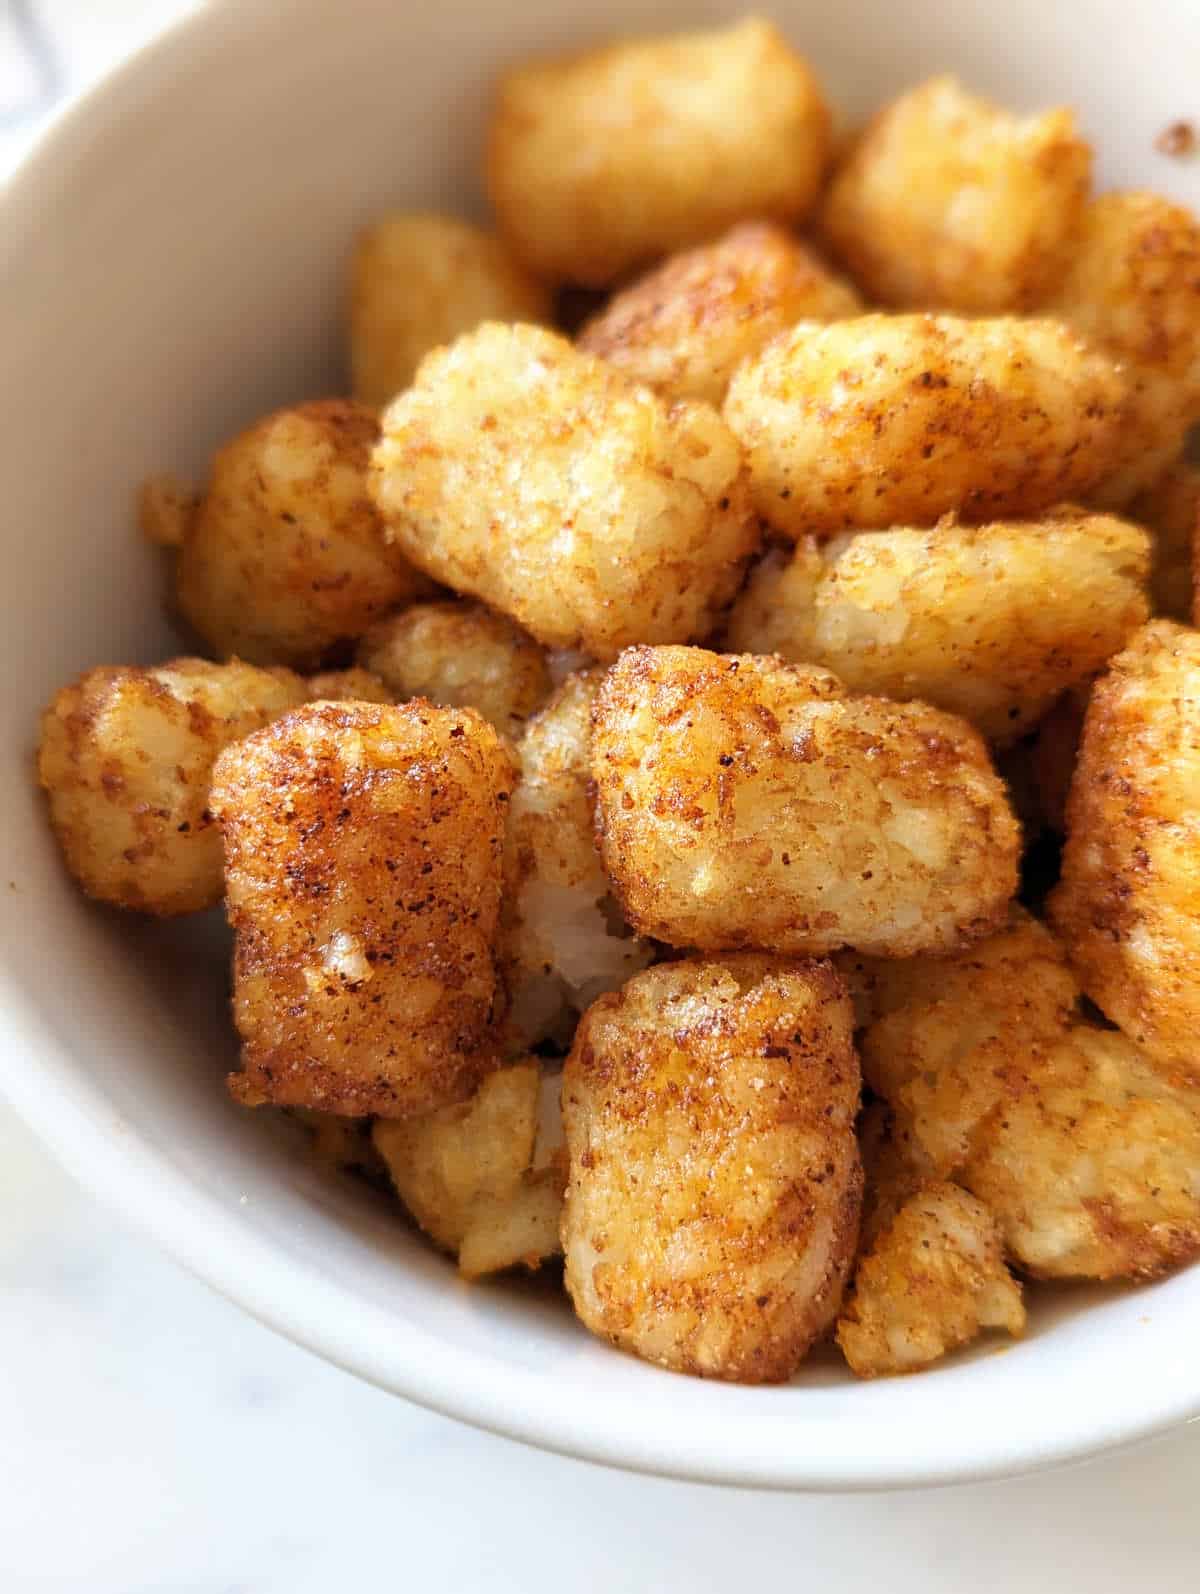 Air fried tater tots after tossing in a little oil and seasonings.